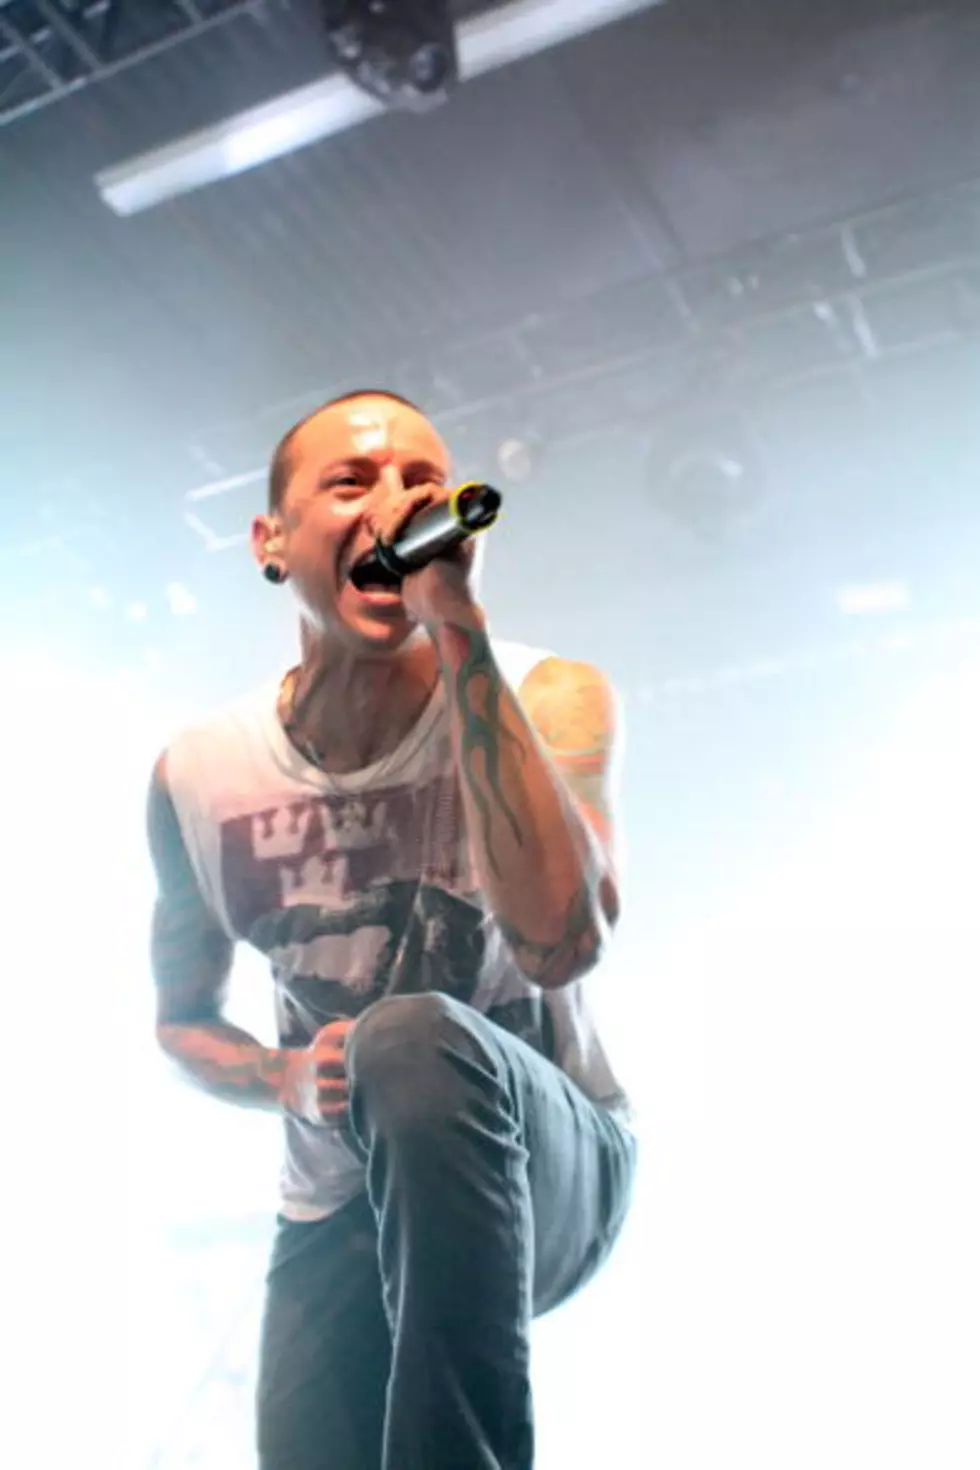 LINKIN PARK’s ‘Iridescent’ Video To Premiere Tomorrow